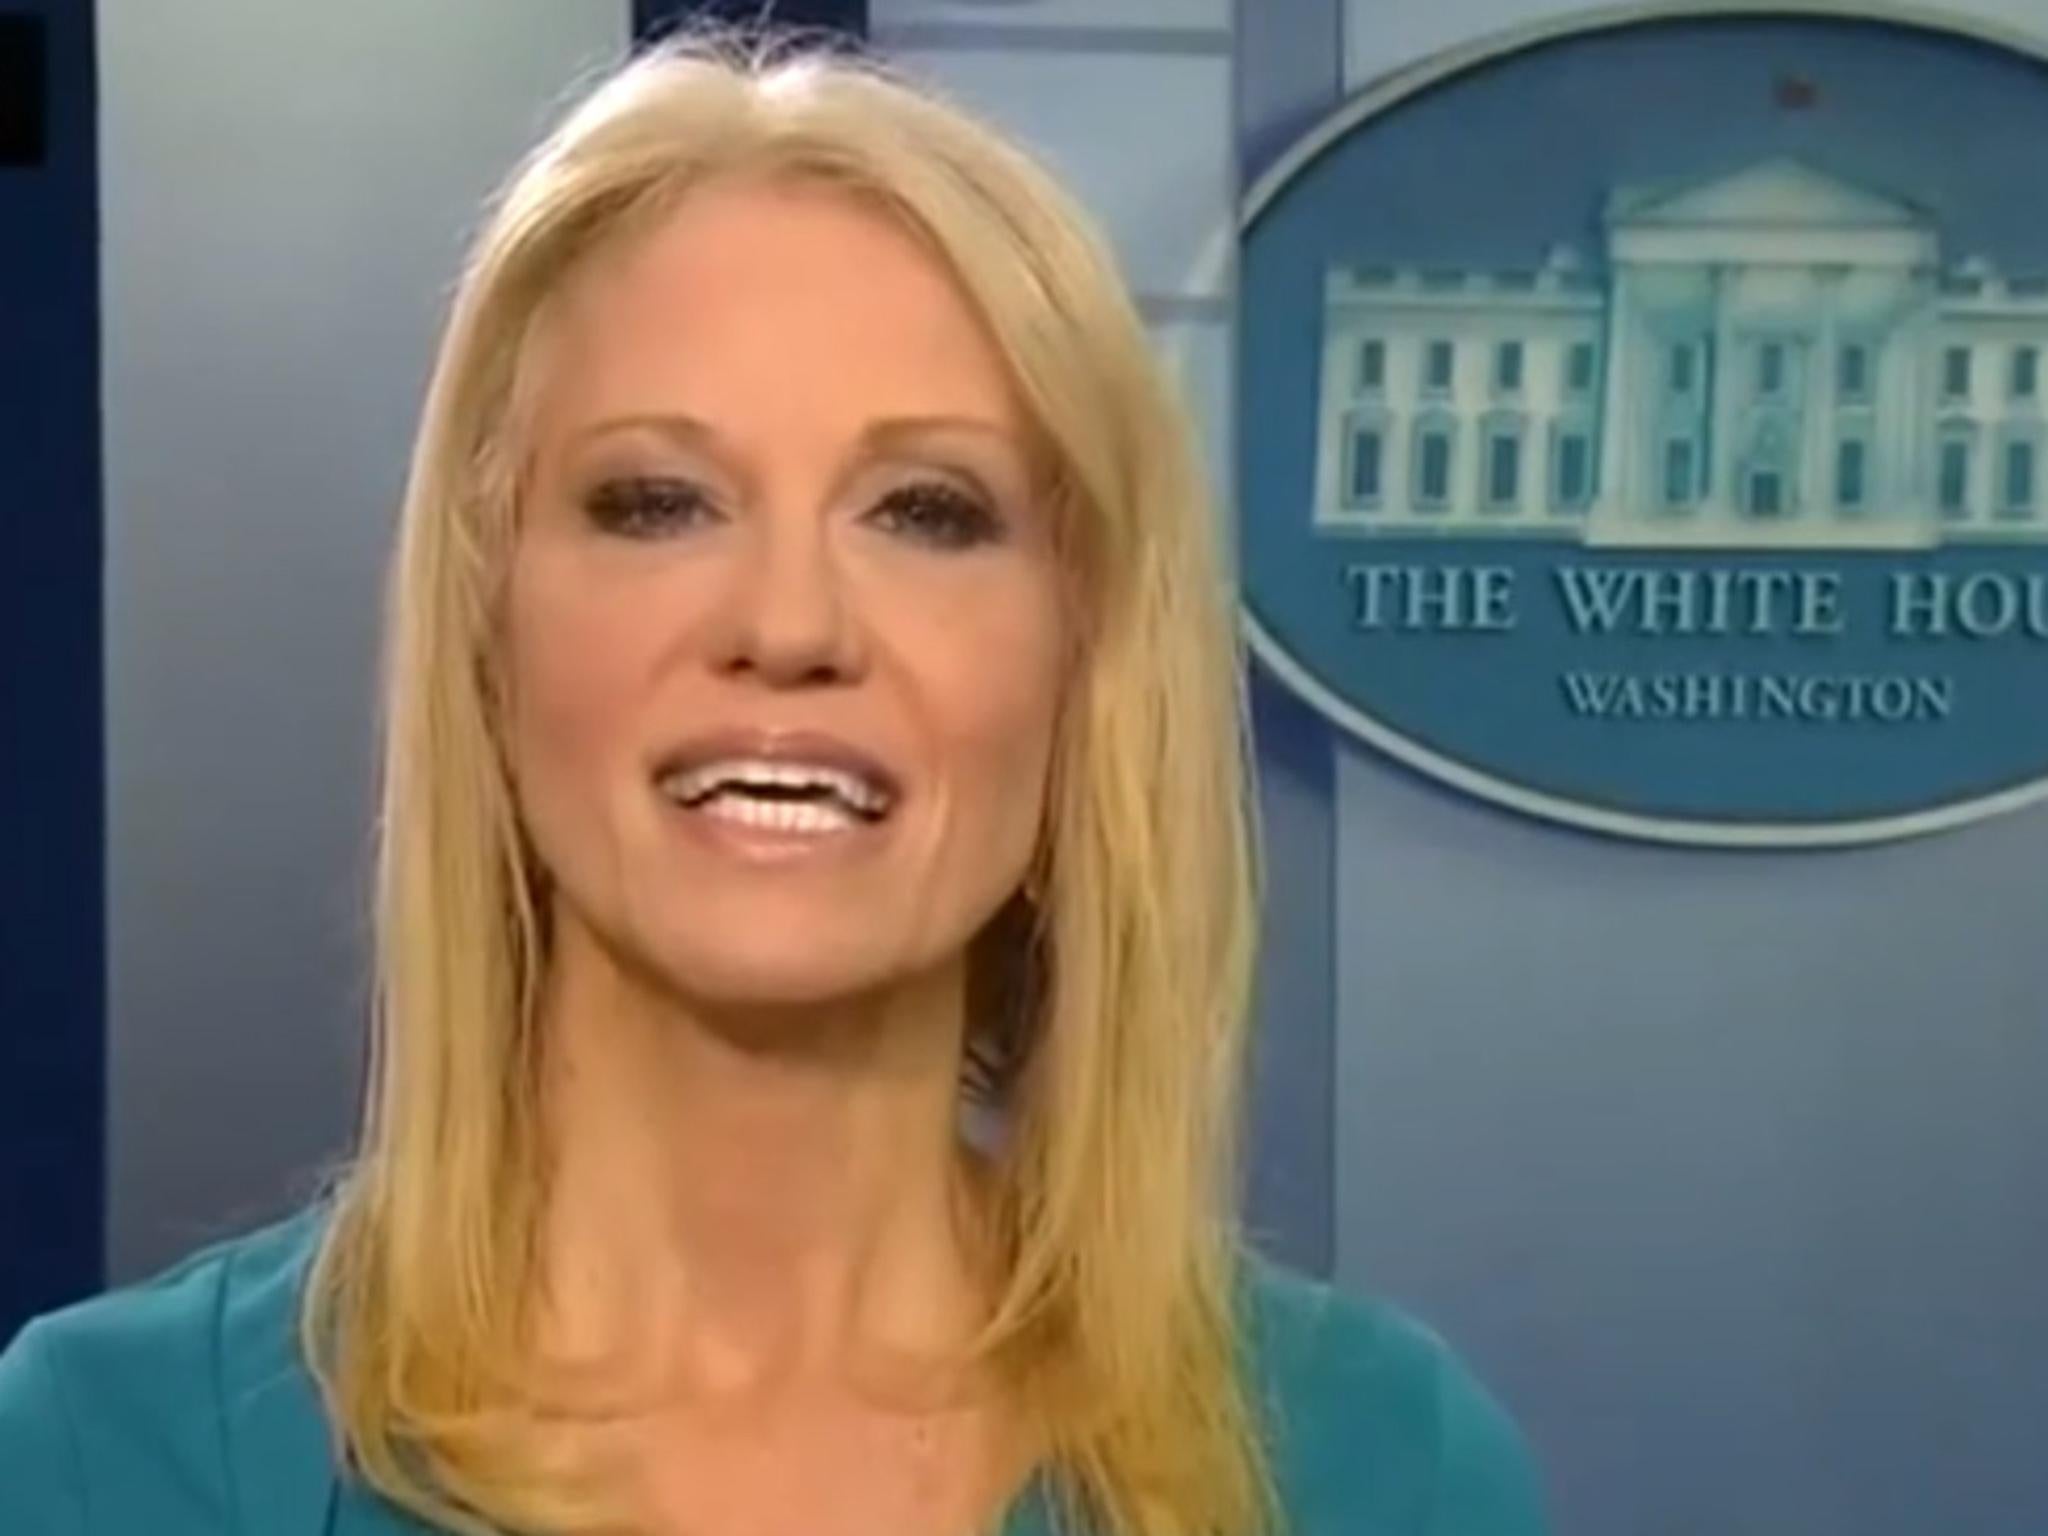 Kellyanne Conway was interviewed in the White House Briefing Room when she urged viewers to ‘go buy Ivanka’s stuff’